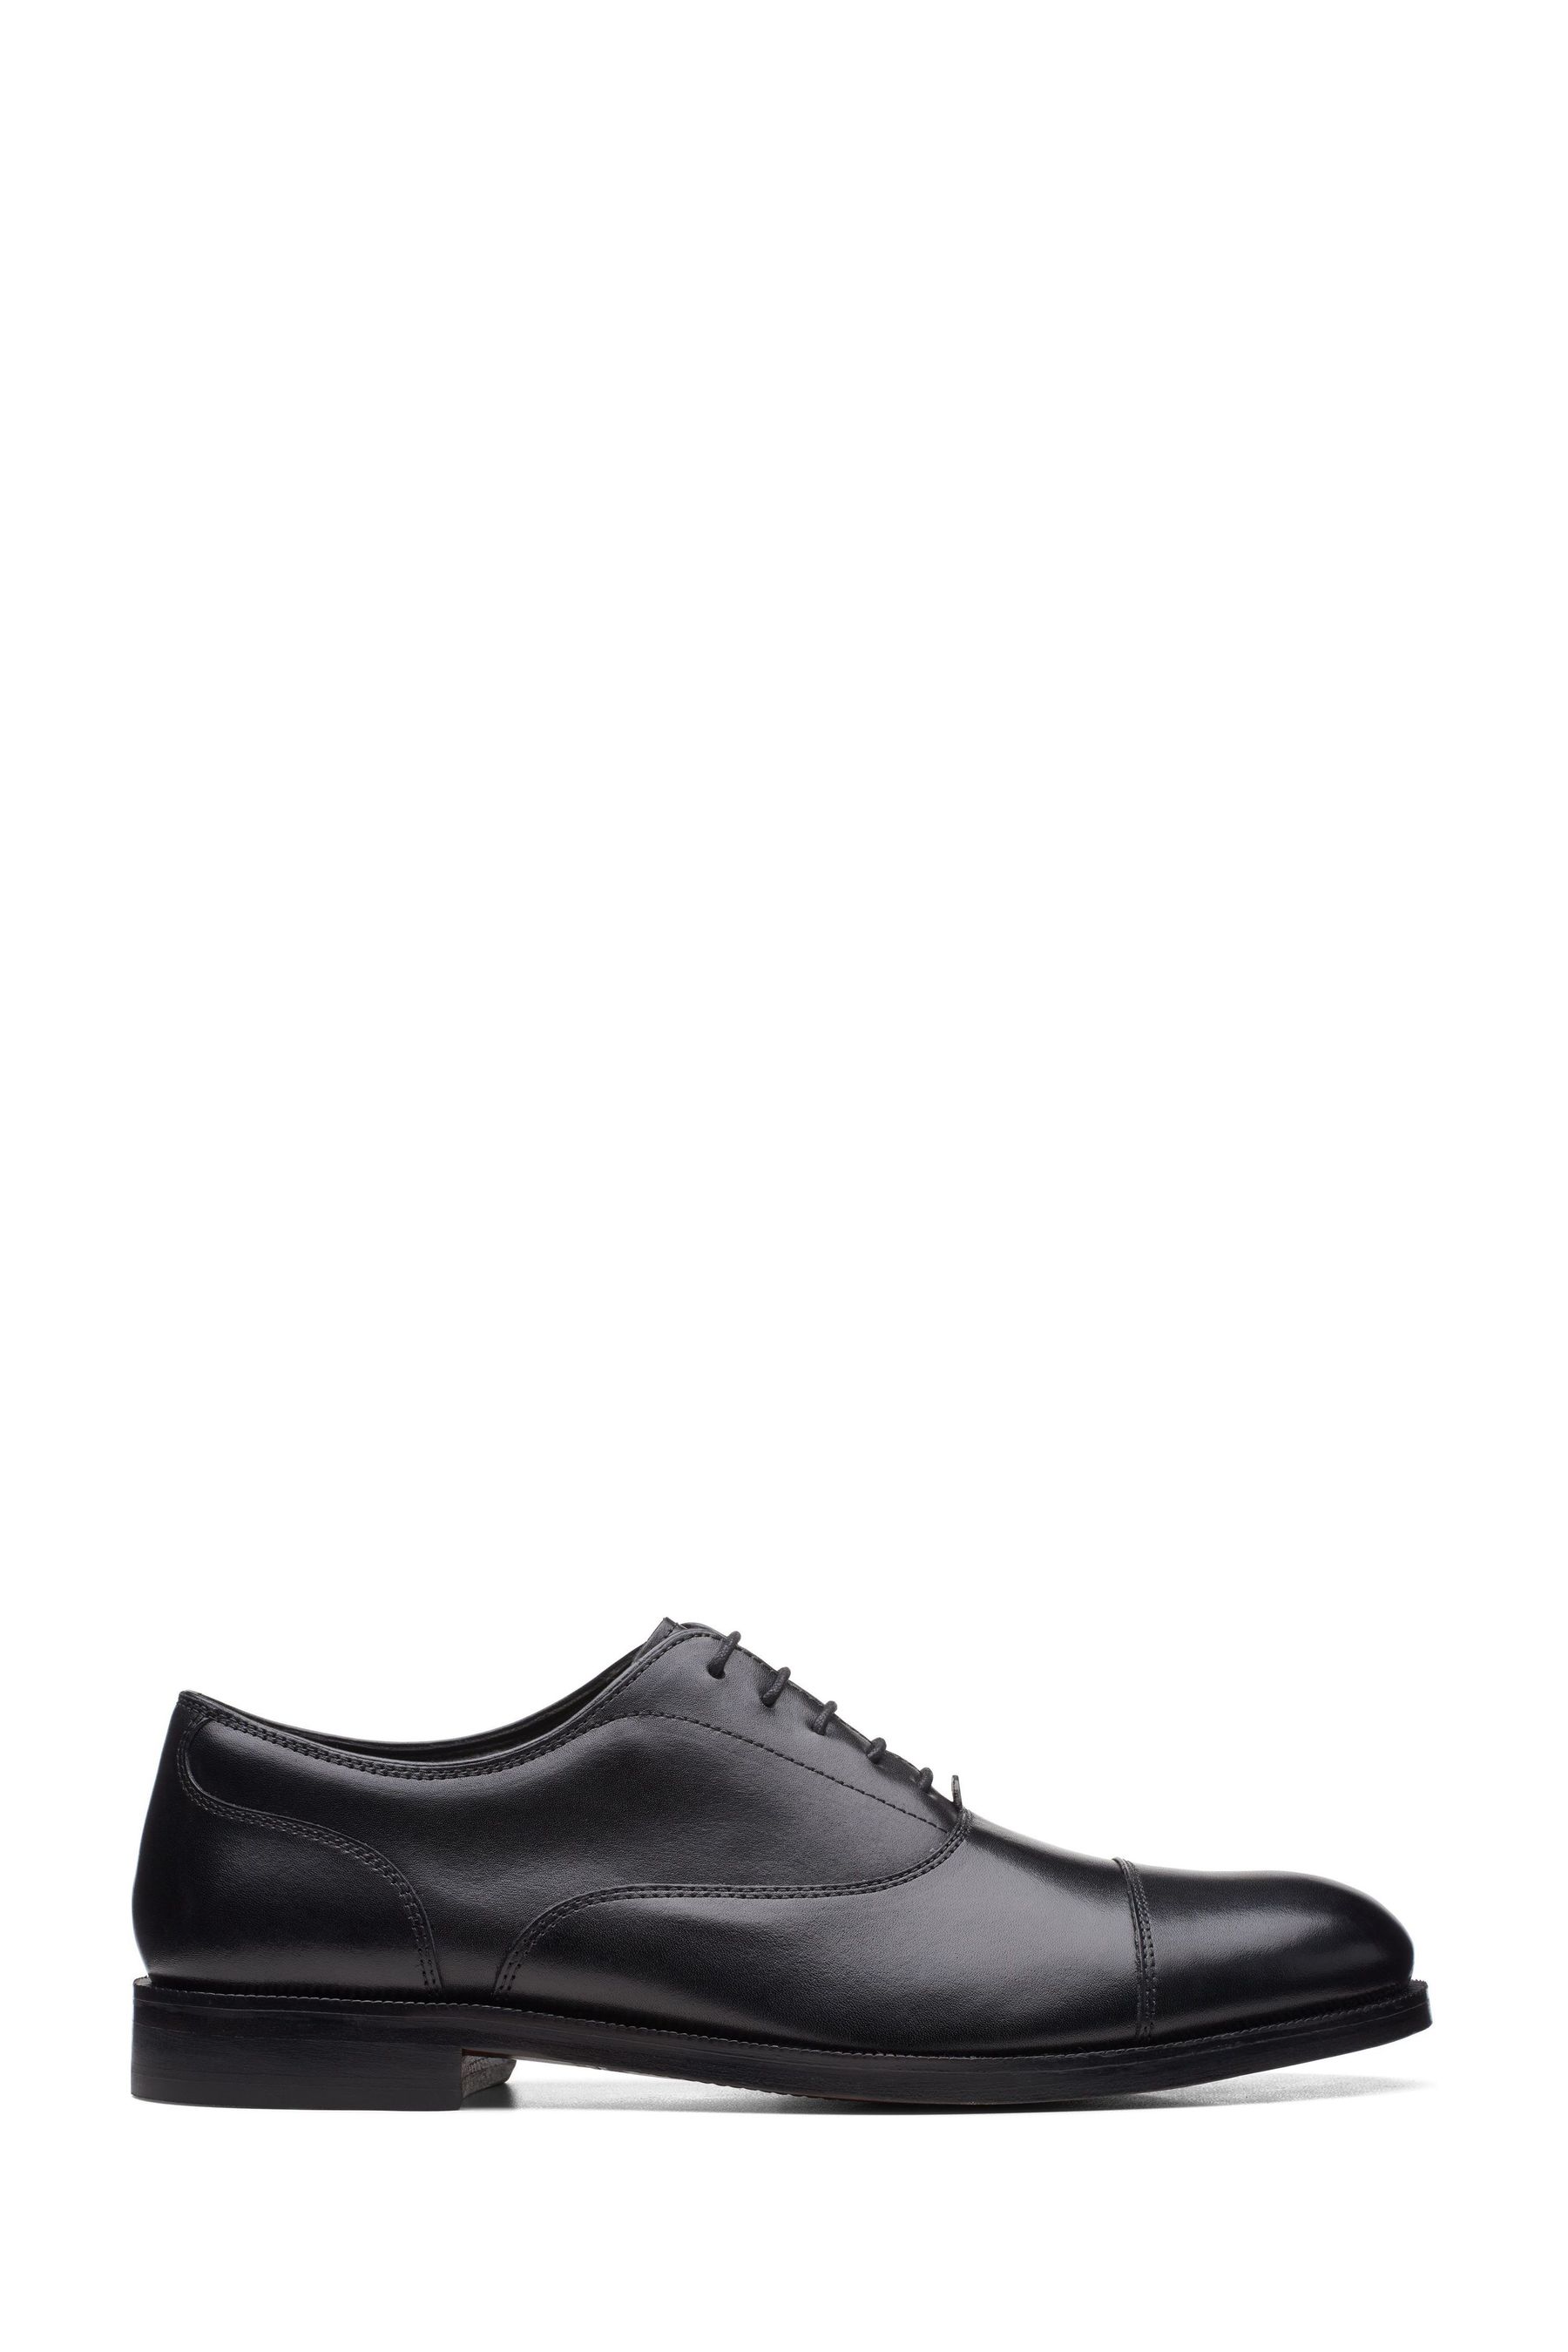 Buy Clarks Black Leather Craftdean Cap Shoes from the Next UK online shop